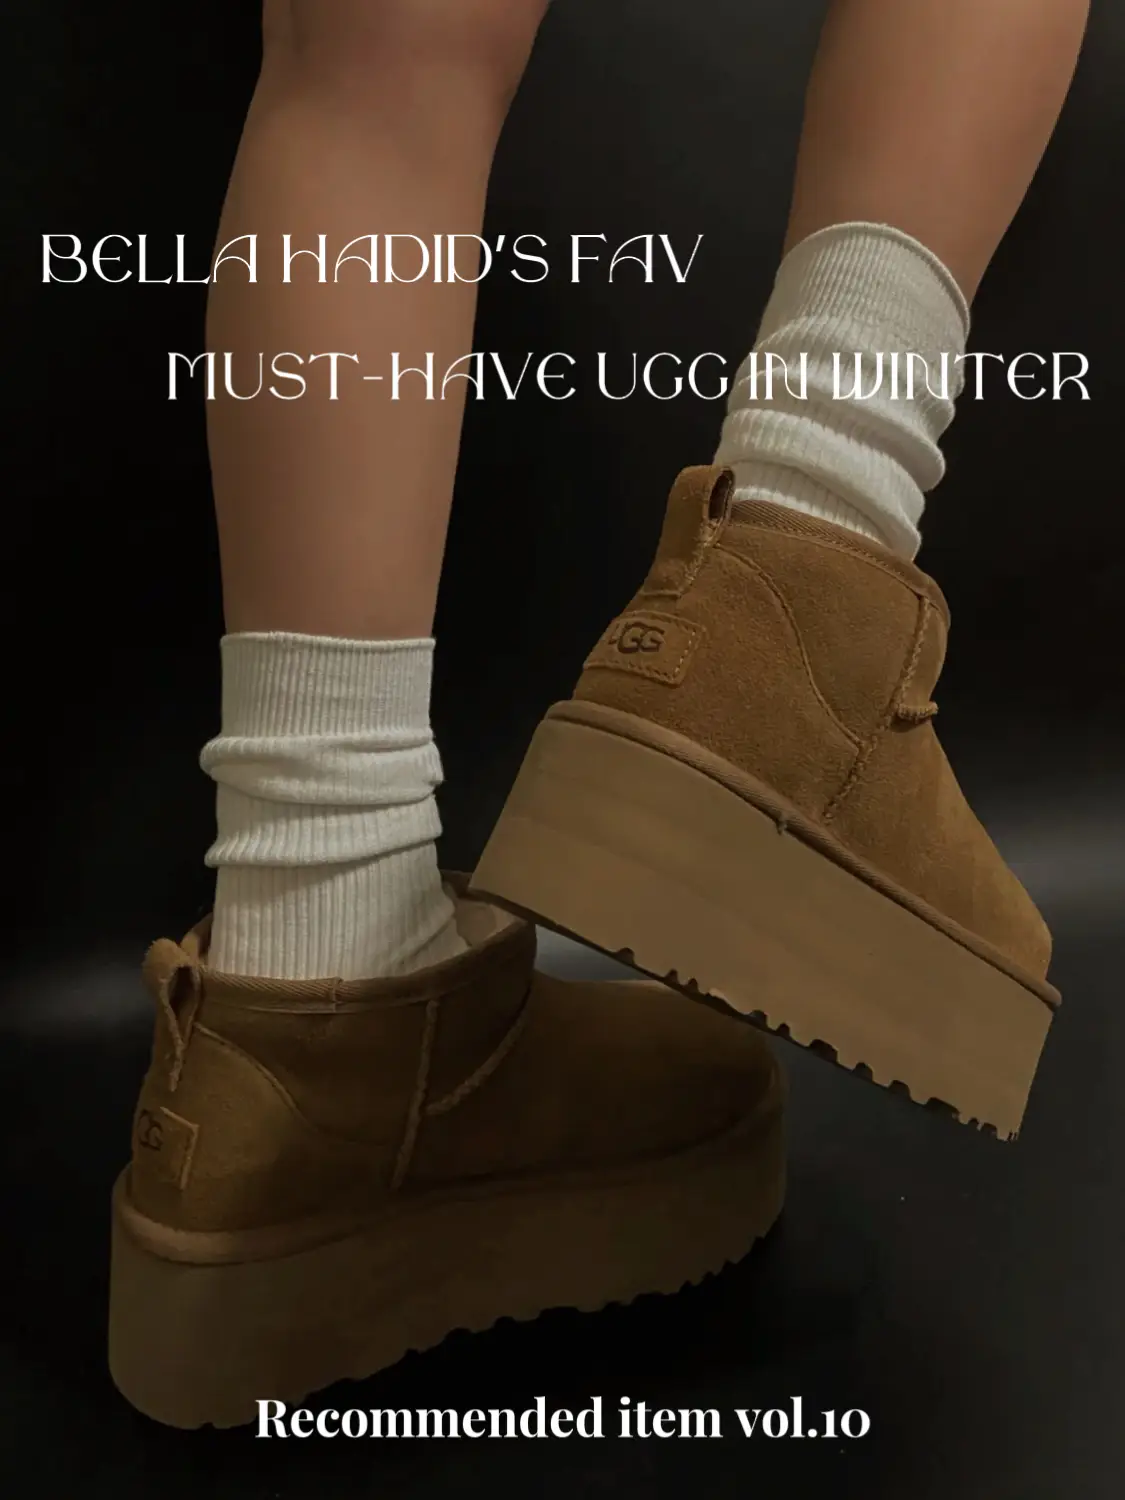 louis vuitton, boots, ugg boots, fashion, inspired, lv, shoes